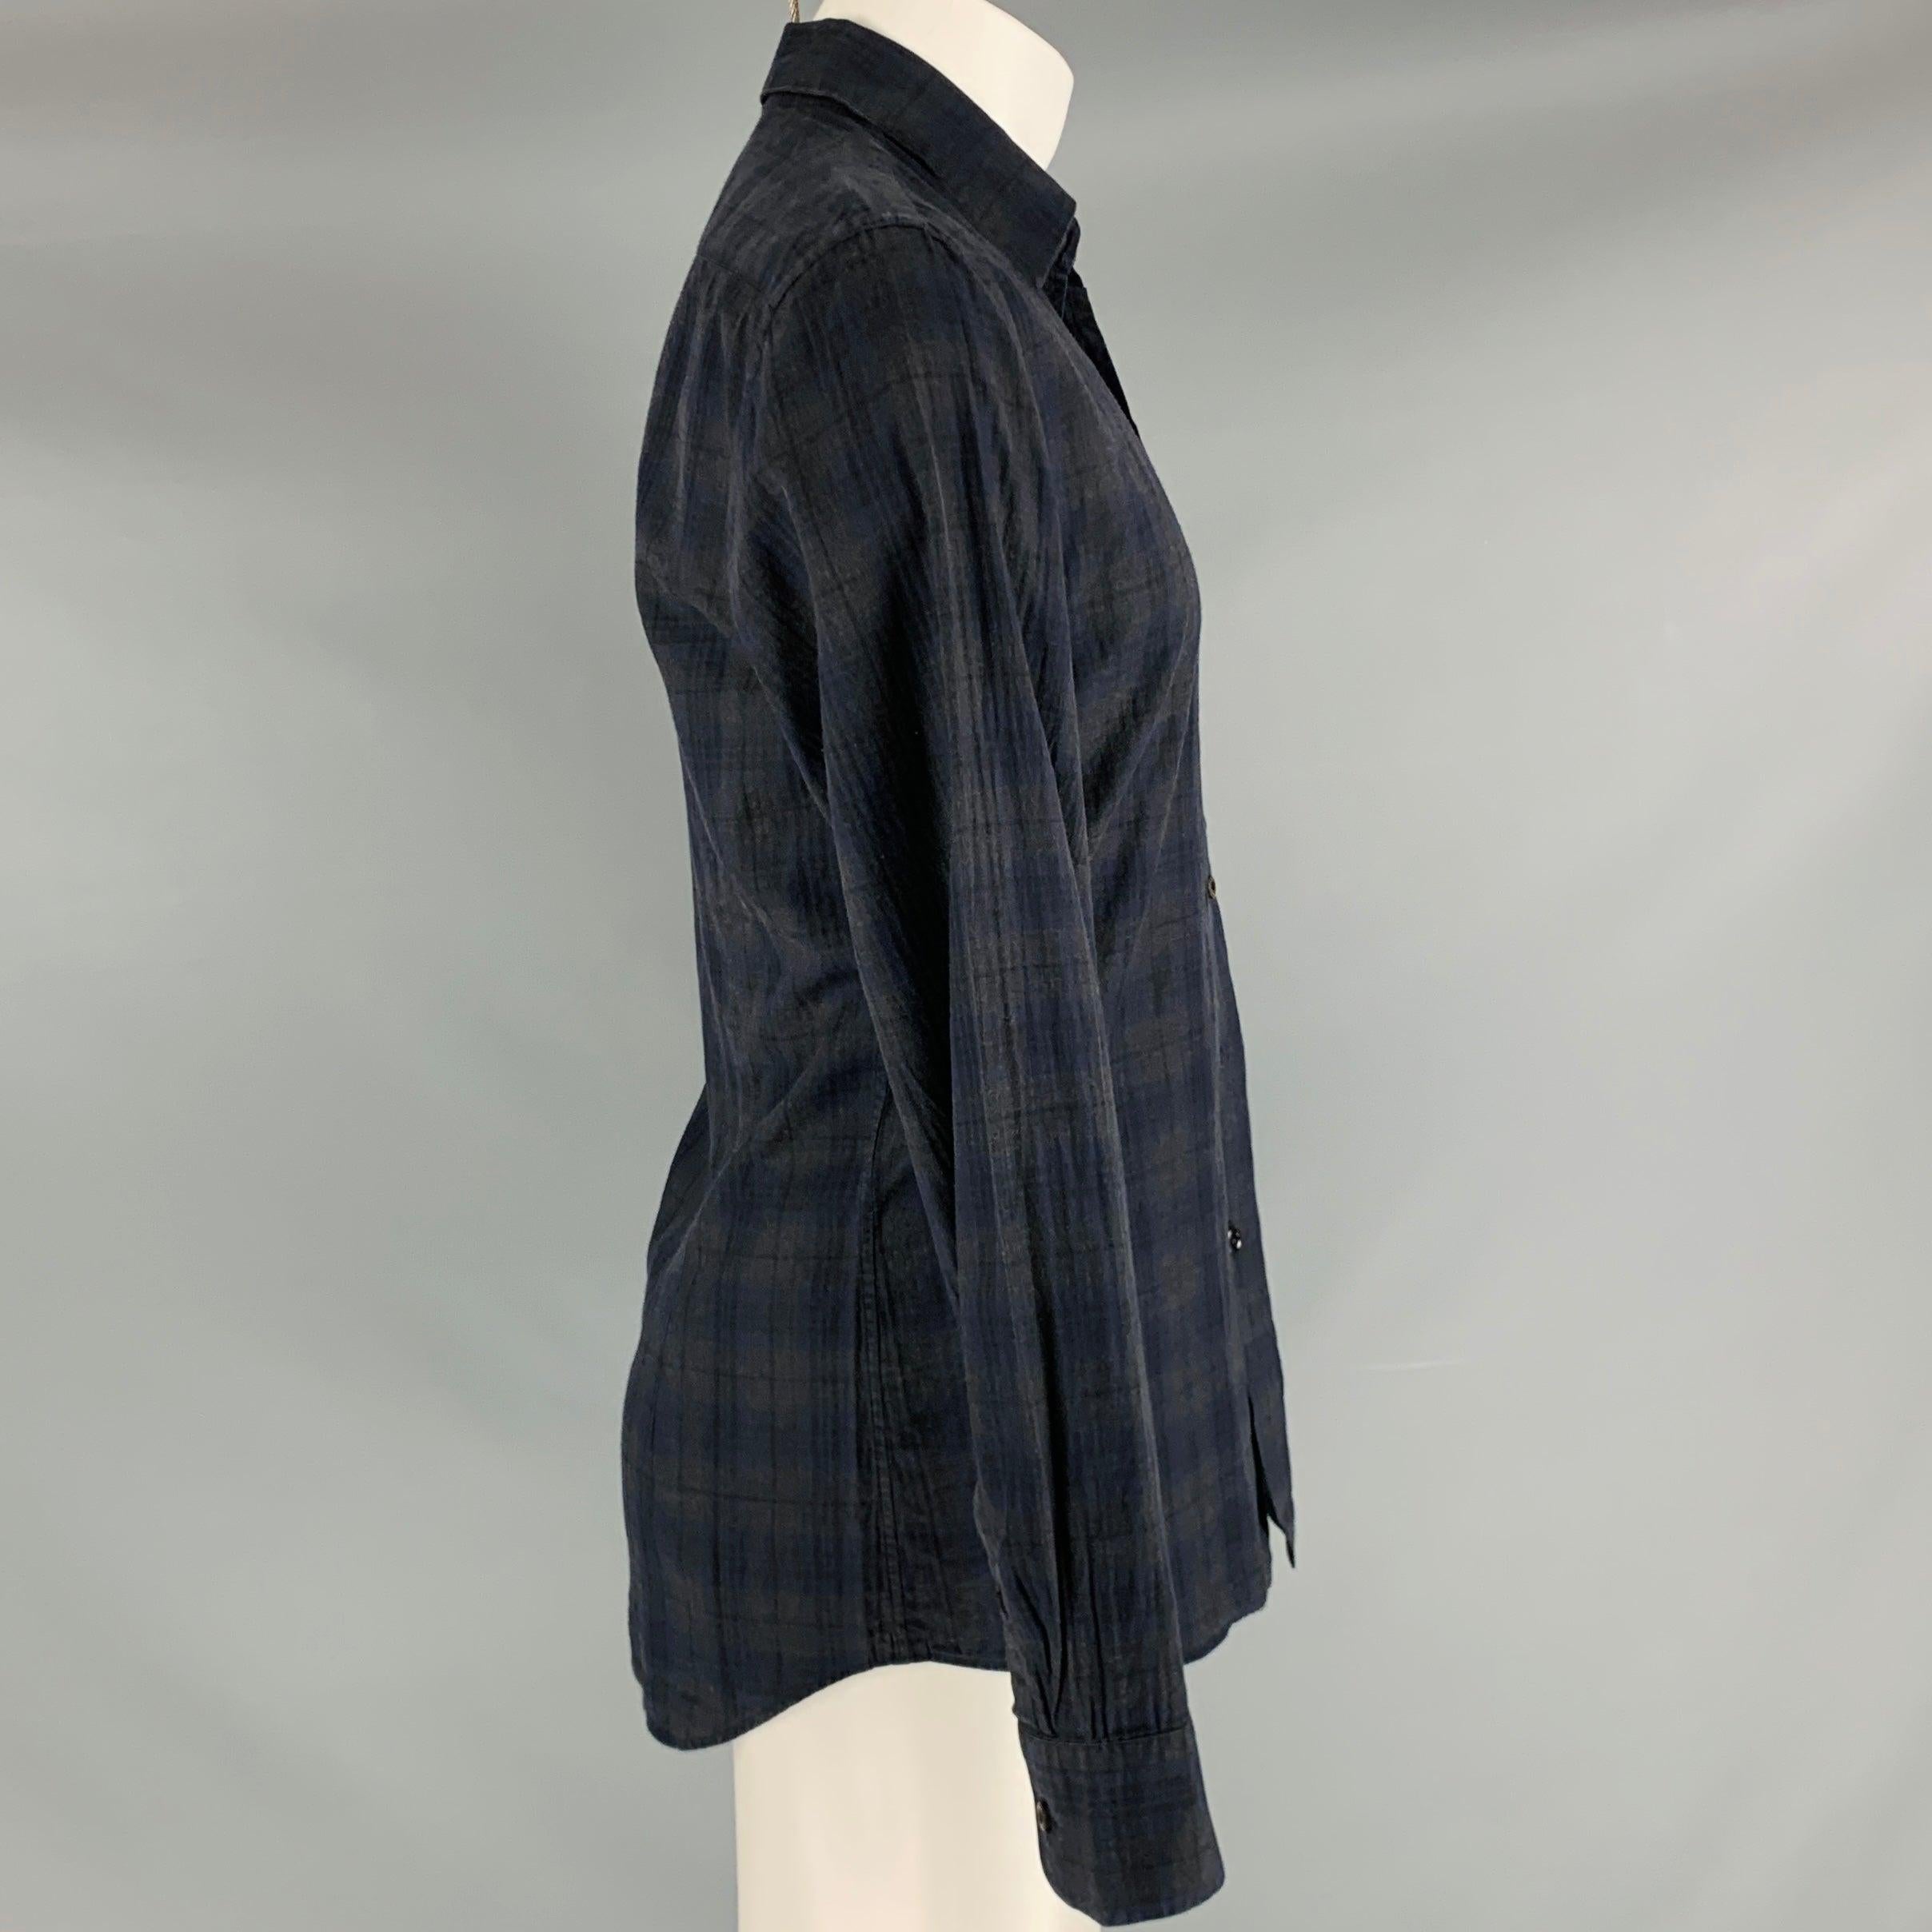 PRADA long sleeve shirt
in a charcoal grey and navy cotton fabric featuring plaid pattern, spread collar, and button closure. Made in Italy.Very Good Pre-Owned Condition. Missing middle button, as is. 

Marked:   40/15.75 

Measurements: 
